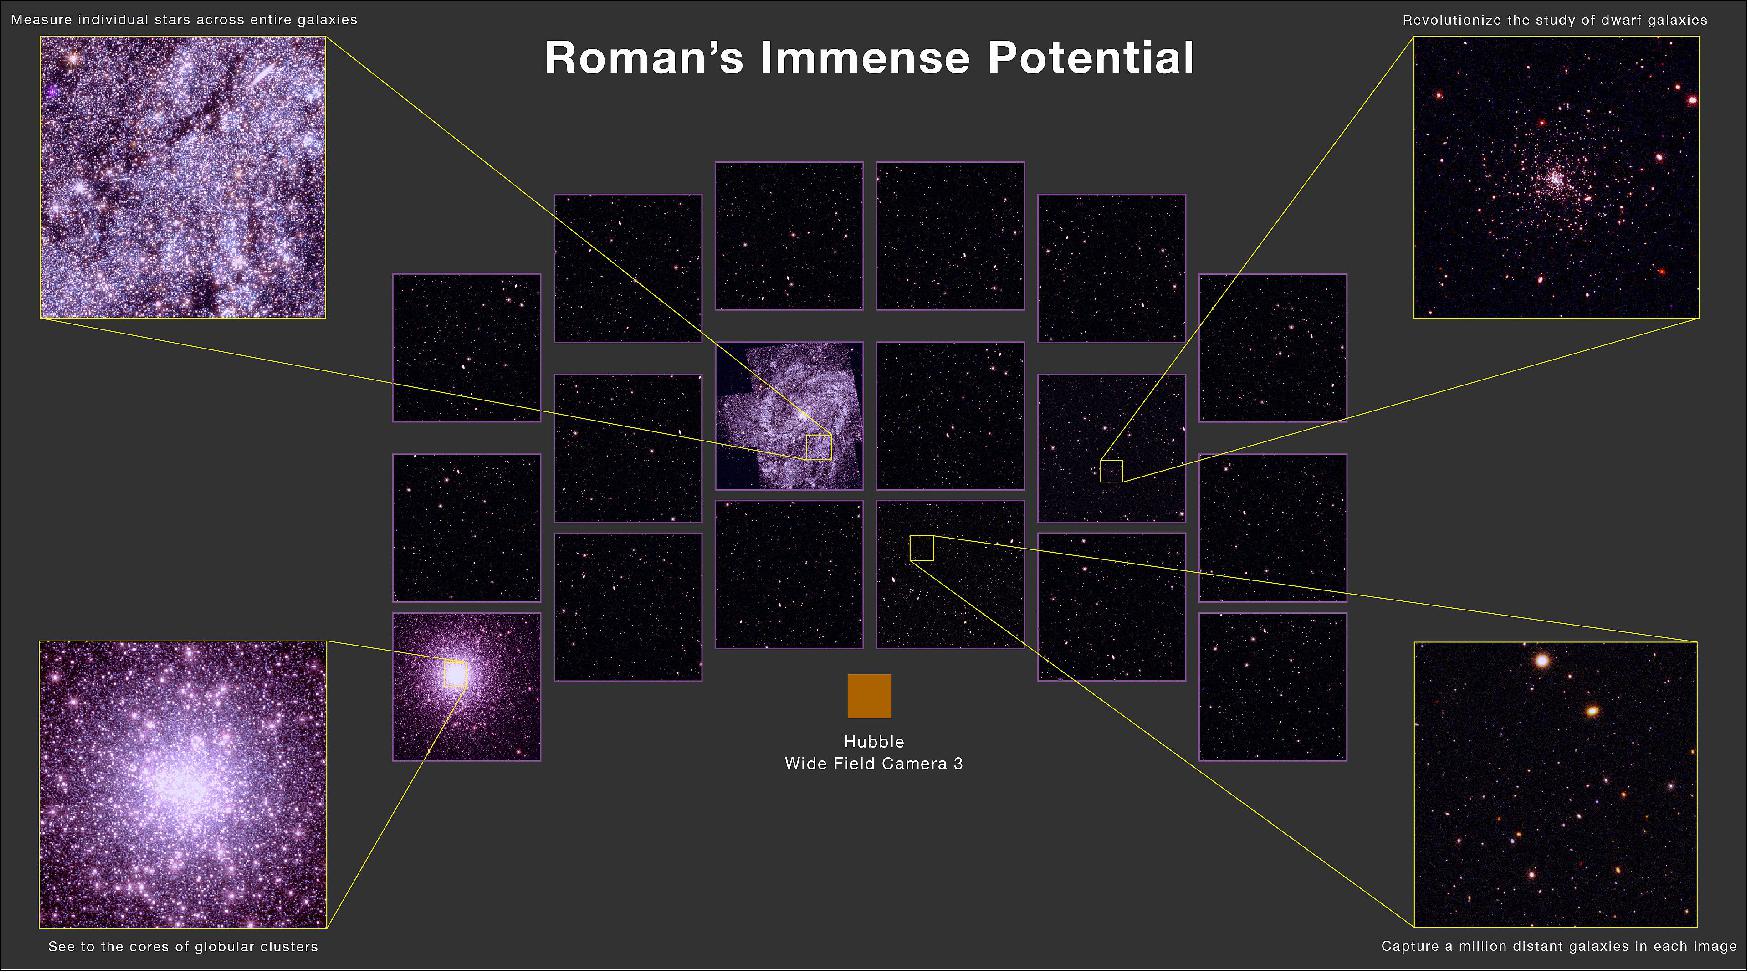 Figure 32: This simulated image illustrates the wide range of science enabled by Roman's extremely wide field of view and exquisite resolution. The purple squares, which all contain background imagery simulated using data from Hubble’s Cosmic Assembly Near-infrared Deep Extragalactic Survey (CANDELS) program, outline the area Roman can capture in a single observation. An orange square shows the field of view of Hubble’s Wide Field Camera 3 for comparison. While the CANDELS program took Hubble nearly 21 days to survey in near-infrared light, Roman’s large field of view and higher efficiency would allow it to survey the same area in less than half an hour. Top left: This view illustrates a region of the large nearby spiral galaxy M83. Top right: A hypothetical distant dwarf galaxy appears in this magnified view, demonstrating Roman’s ability to detect small, faint galaxies at large distances. Bottom left: This magnified view illustrates how Roman will be able to resolve bright stars even in the dense cores of globular star clusters. Bottom right: A zoom of the CANDELS-based background shows the density of high-redshift galaxies Roman will detect (image credit: Benjamin Williams, David Weinberg, Anil Seth, Eric Bell, Dave Sand, Dominic Benford, and the WINGS Science Investigation Team)